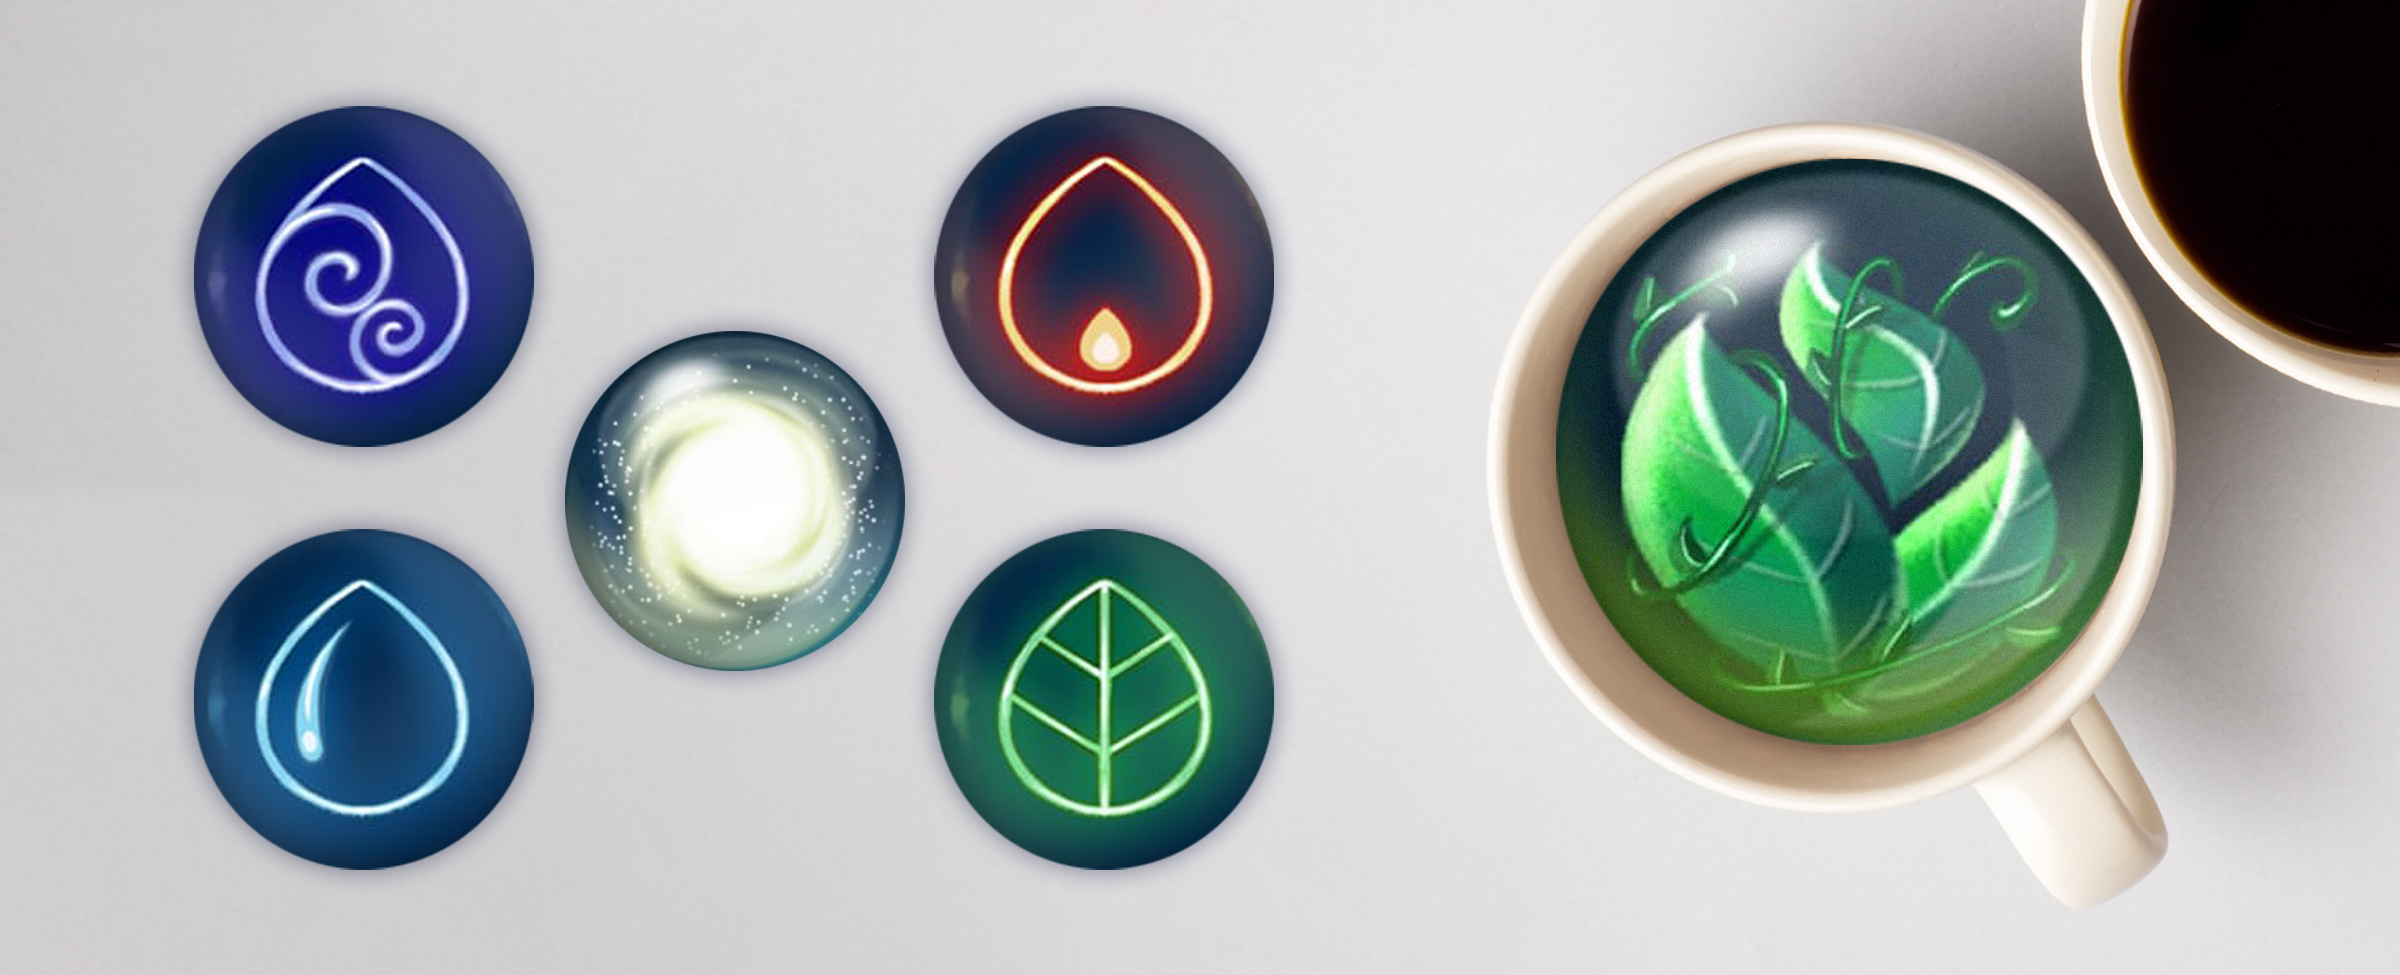 Four illustrated symbols – earth, air, fire, and water – appear within circles on top of a white table surface, surrounding another circle depicting the galaxy. To the right, a white coffee cup is filled with illustrated green leaves, and slightly appearing in the top right corner of the screen is another coffee cup filled with black coffee.